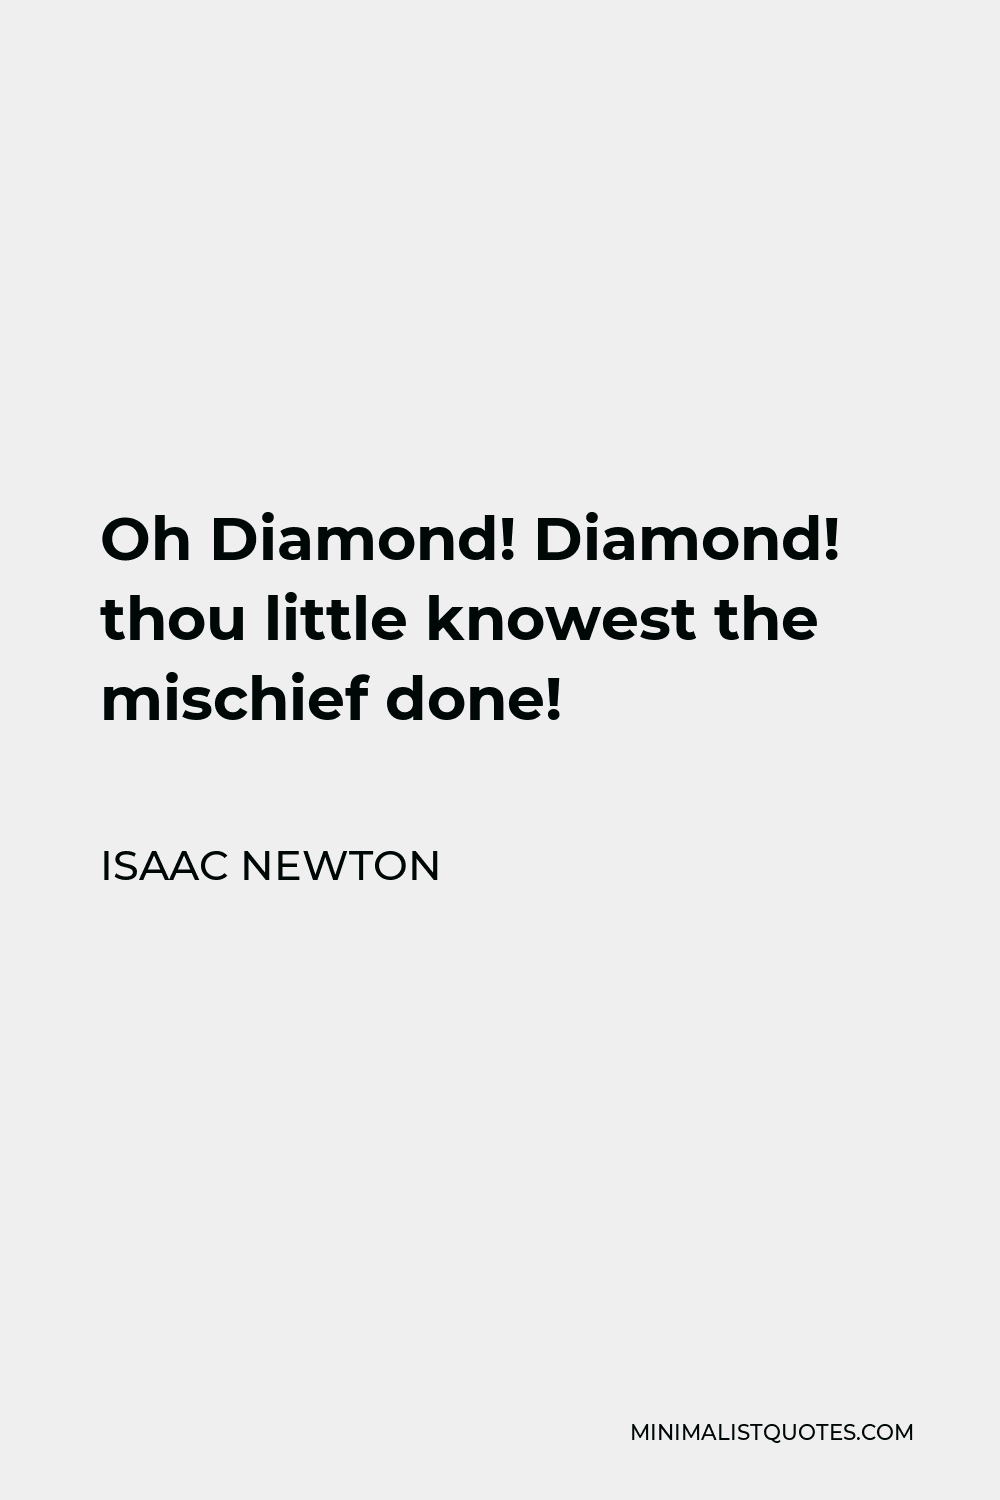 Isaac Newton Quote - Oh Diamond! Diamond! thou little knowest the mischief done!